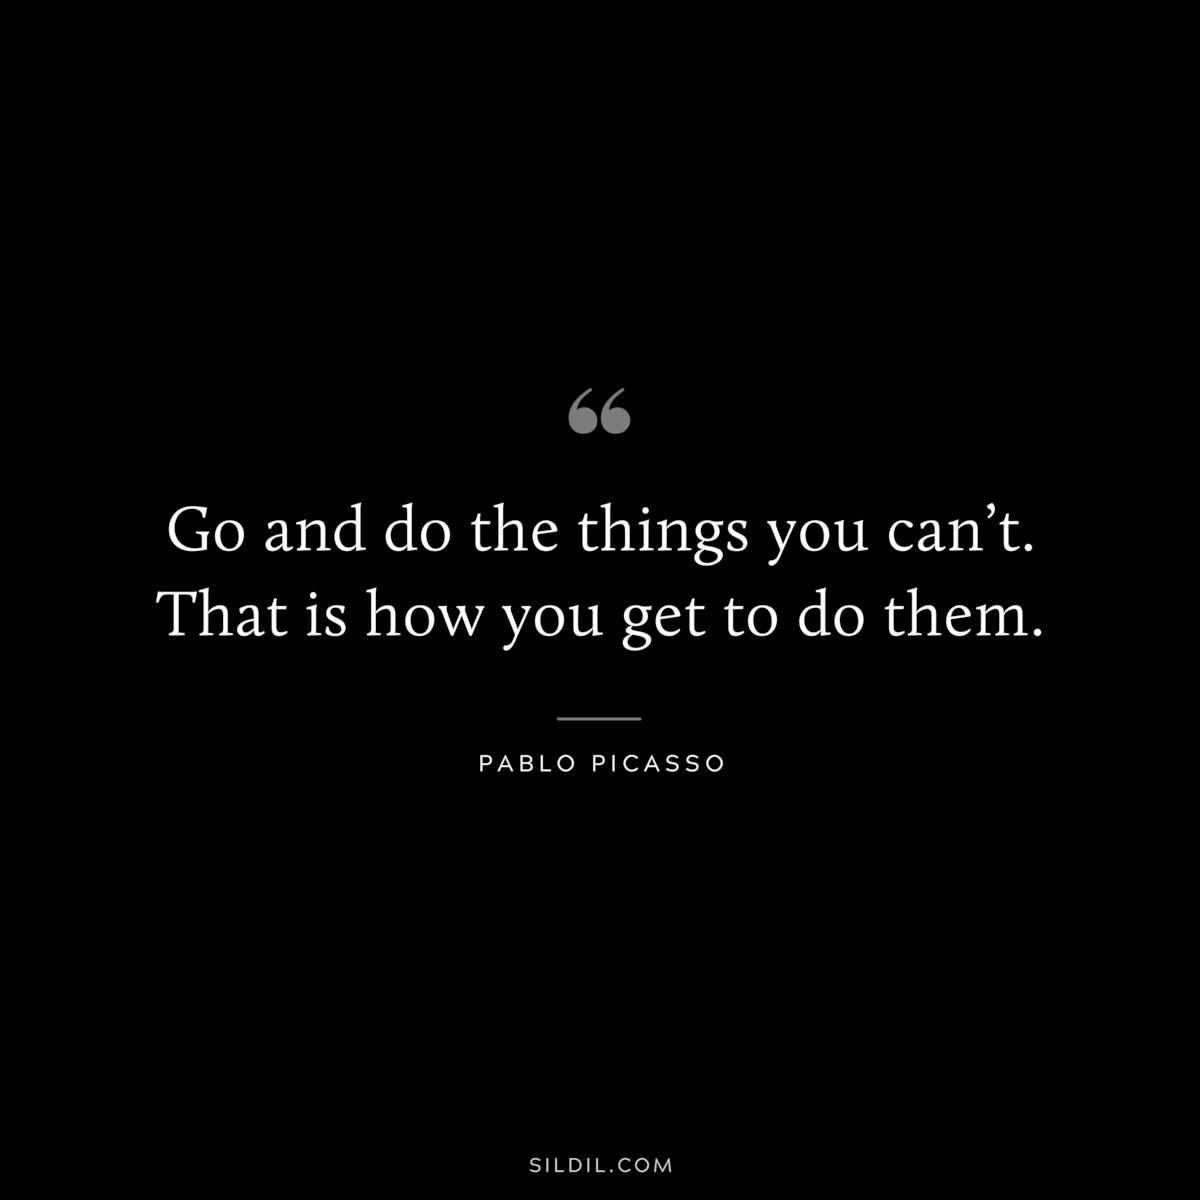 Go and do the things you can’t. That is how you get to do them. ― Pablo Picasso